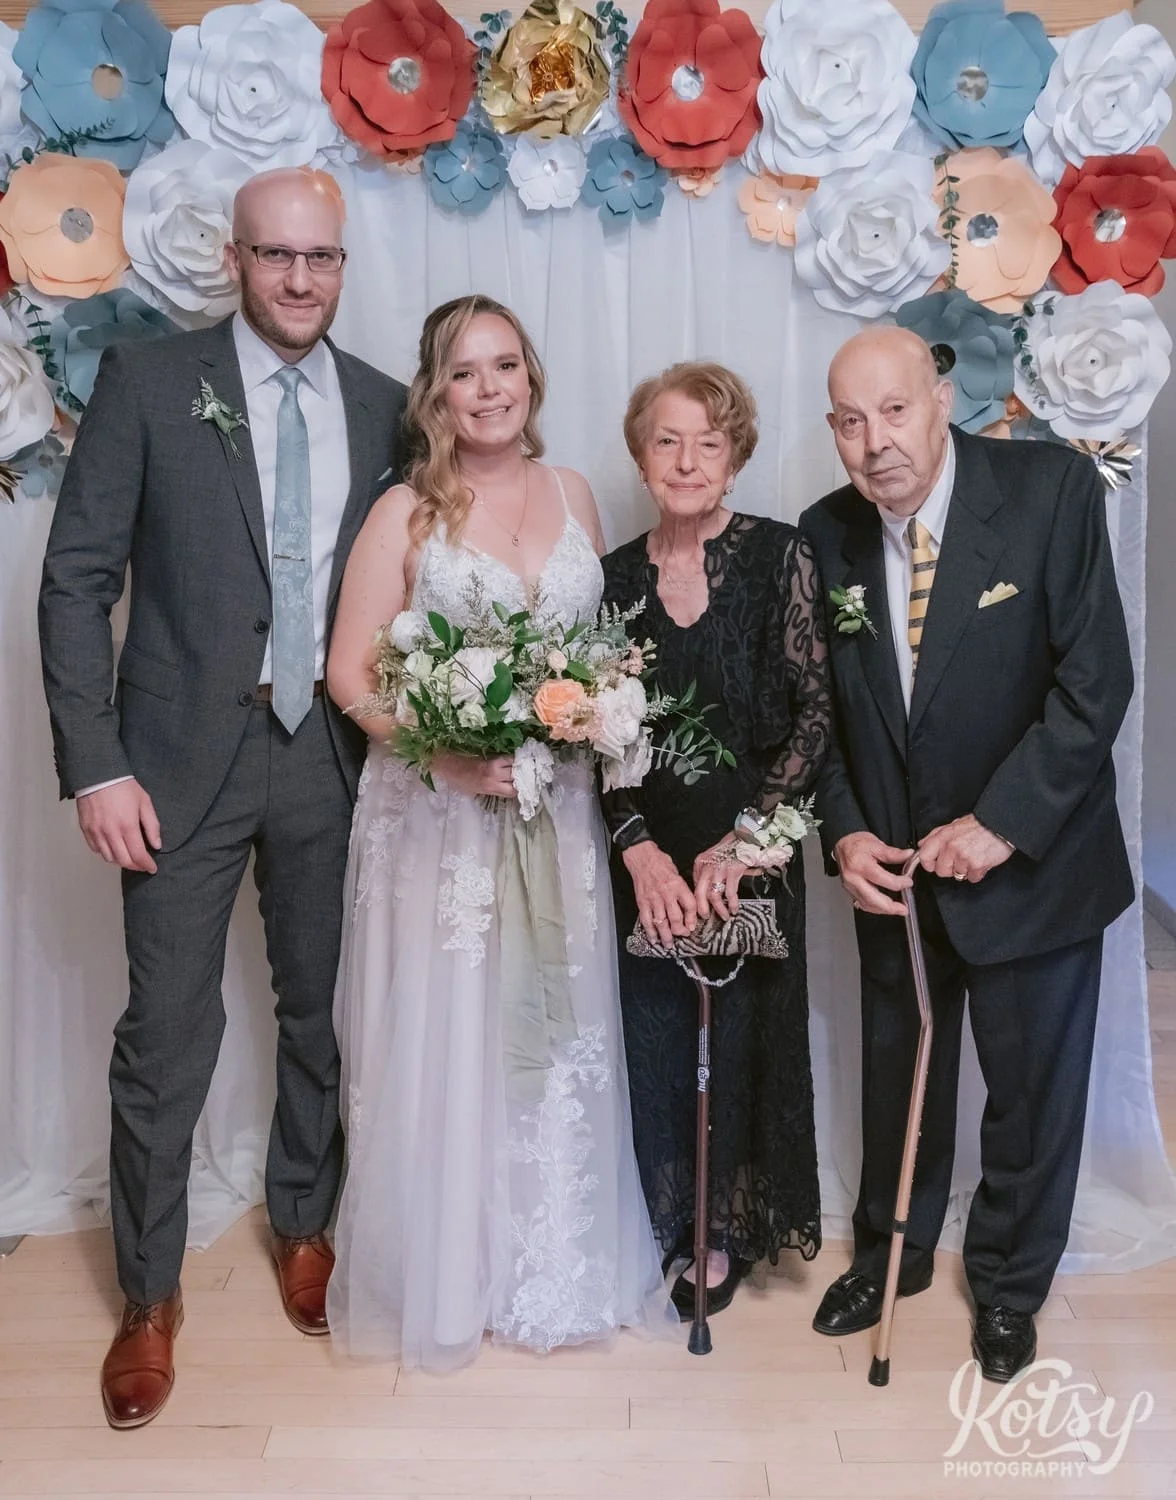 A bride wearing a white bridal gown holding a flower bouquet poses with her groom wearing a gray suit and his grandparents in front of a backdrop at their Second Floor Events wedding reception in Toronto, Canada